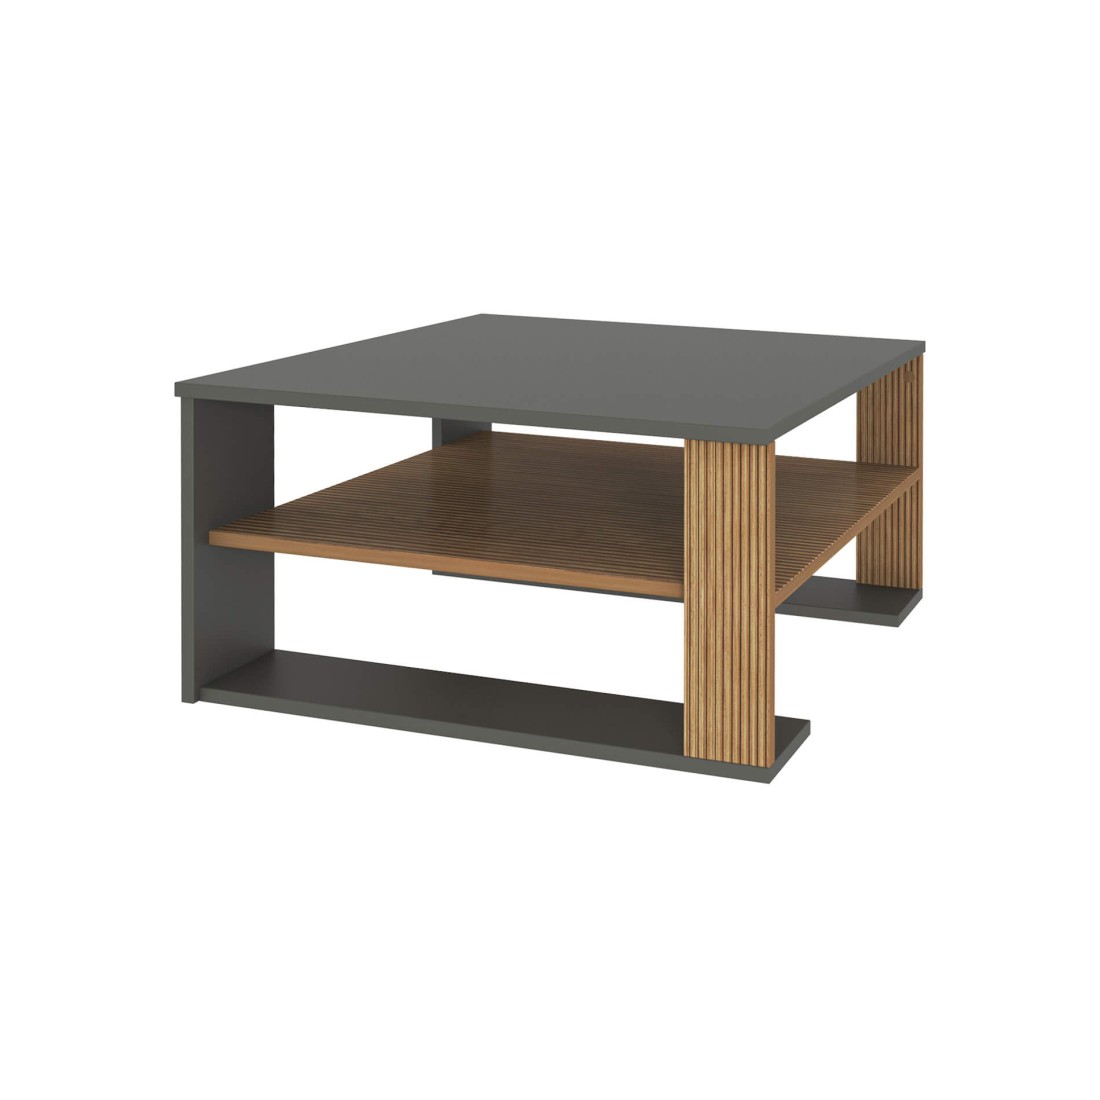 Kabak - Low square coffee table for modern living room